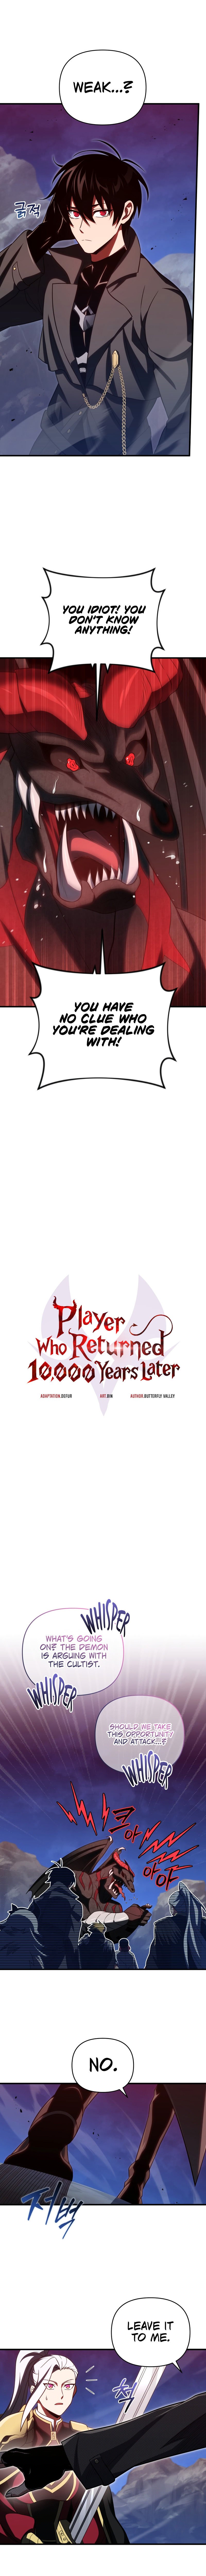 player-who-returned-10000-years-later-chap-69-3